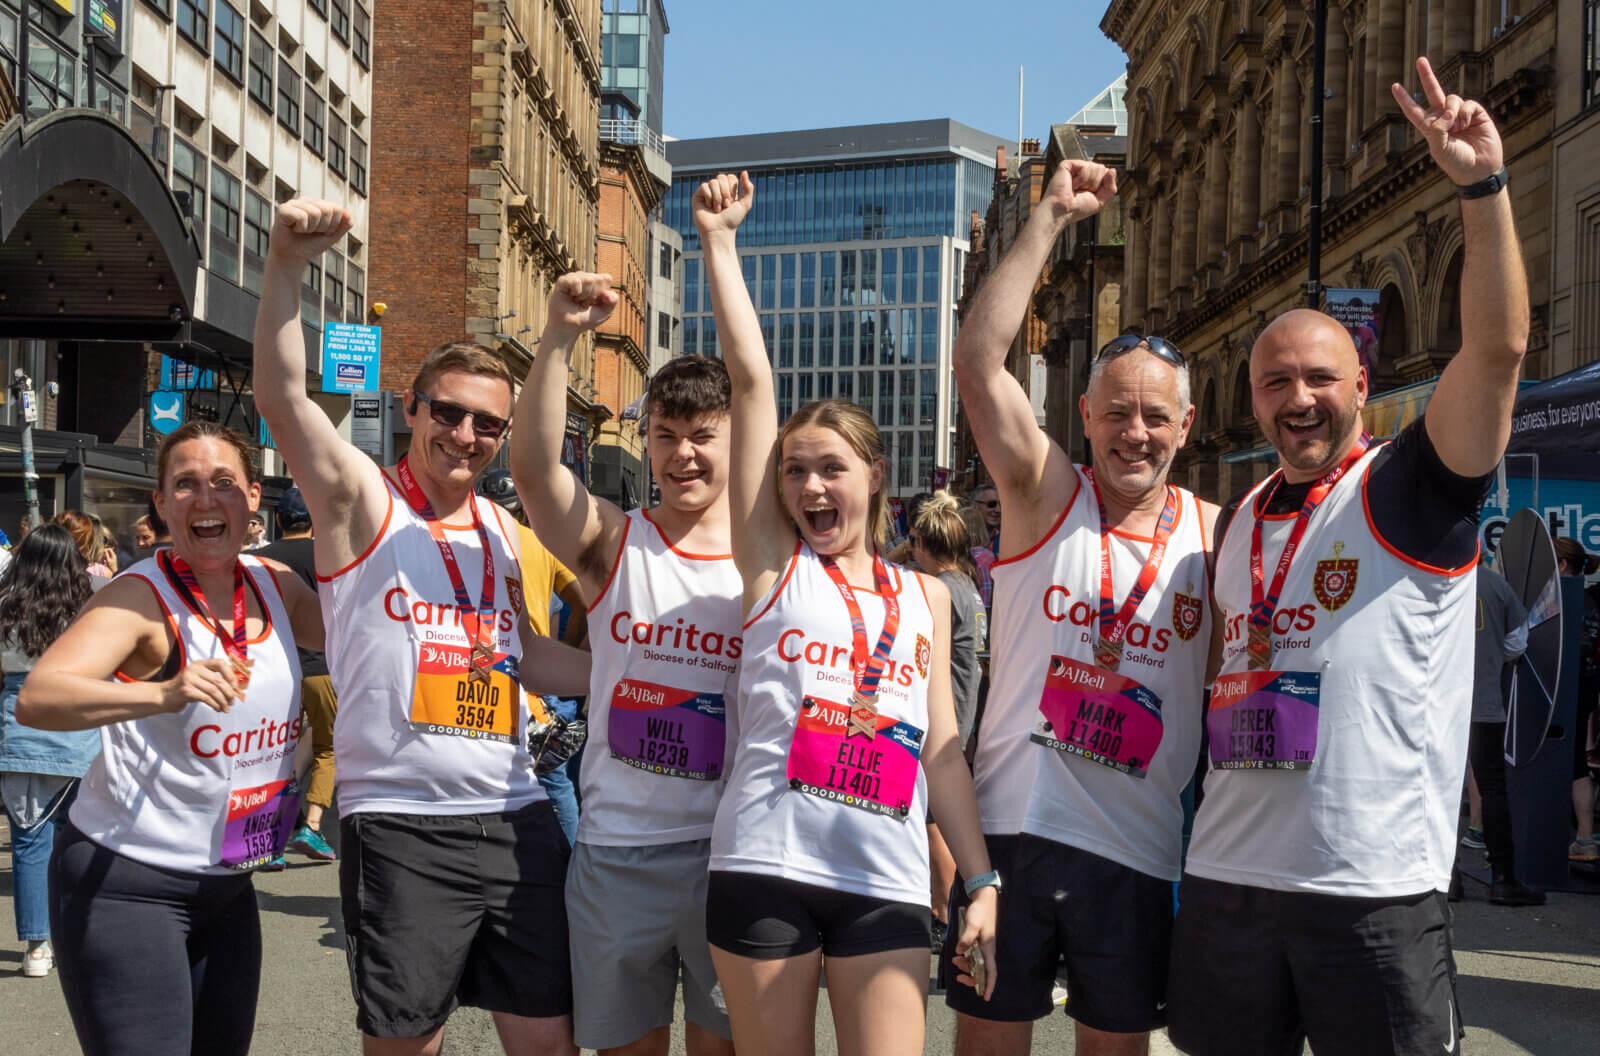 Group of people after running the Great Manchester Run. All wearing medals and Caritas branded white vests and are waving their arms in the air in celebration